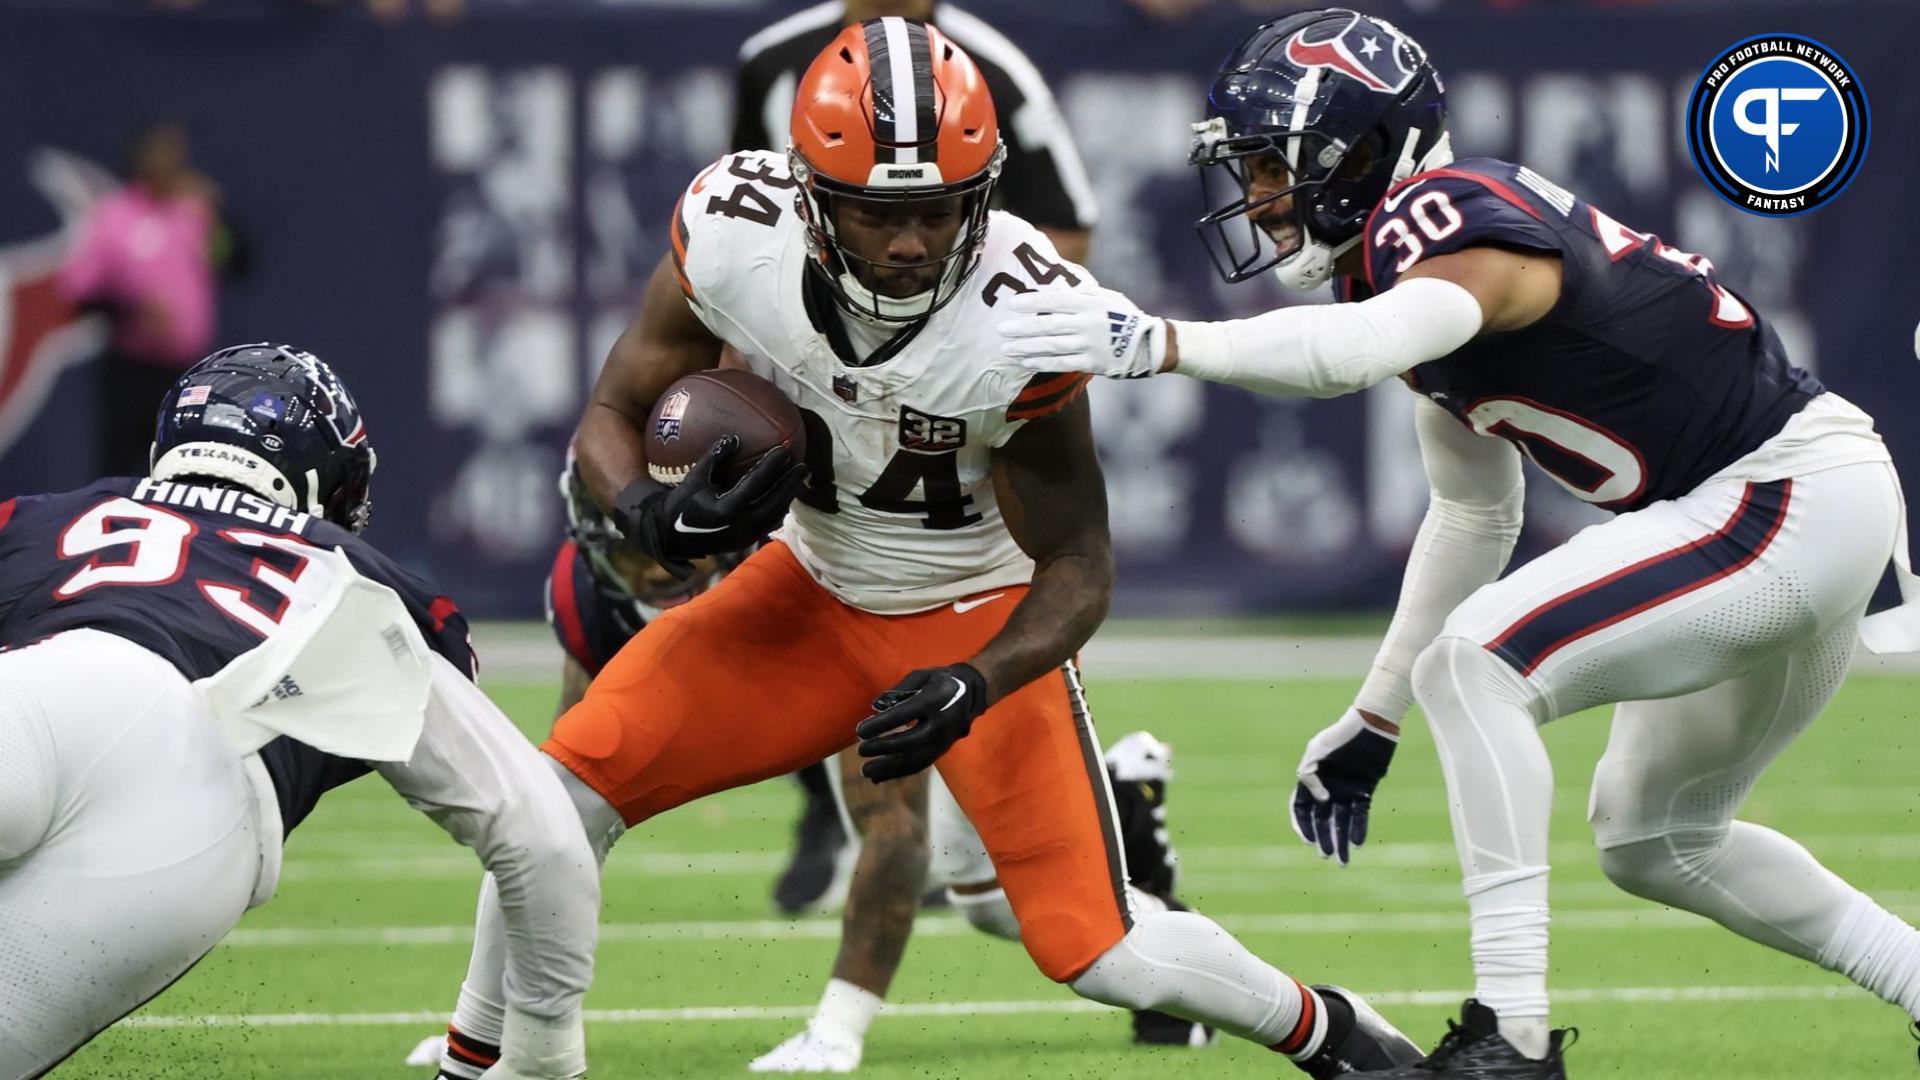 Cleveland Browns running back Jerome Ford (34) rushes against Houston Texans safety DeAndre Houston-Carson (30) in the second half at NRG Stadium.